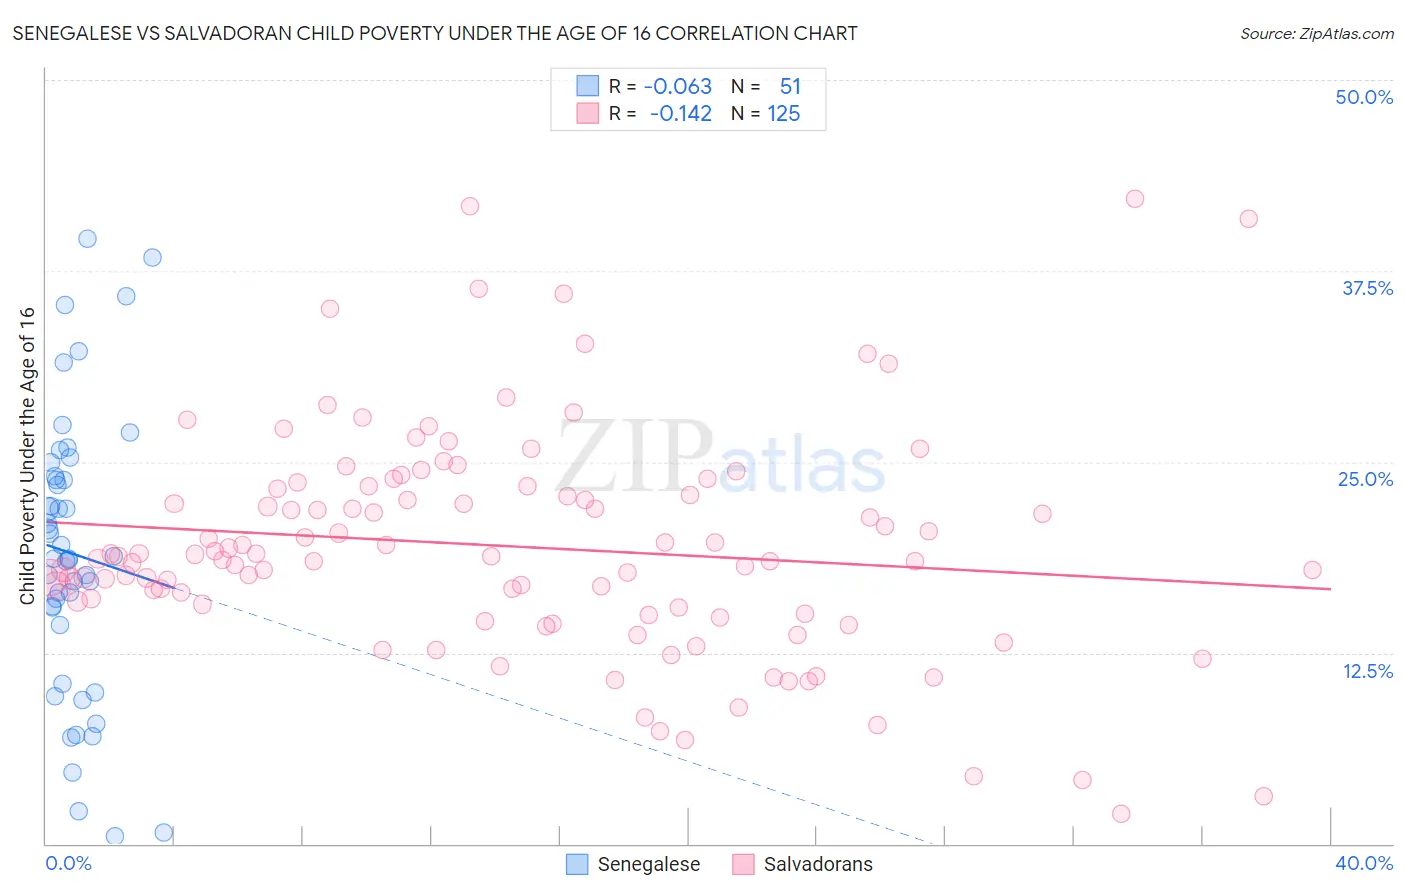 Senegalese vs Salvadoran Child Poverty Under the Age of 16